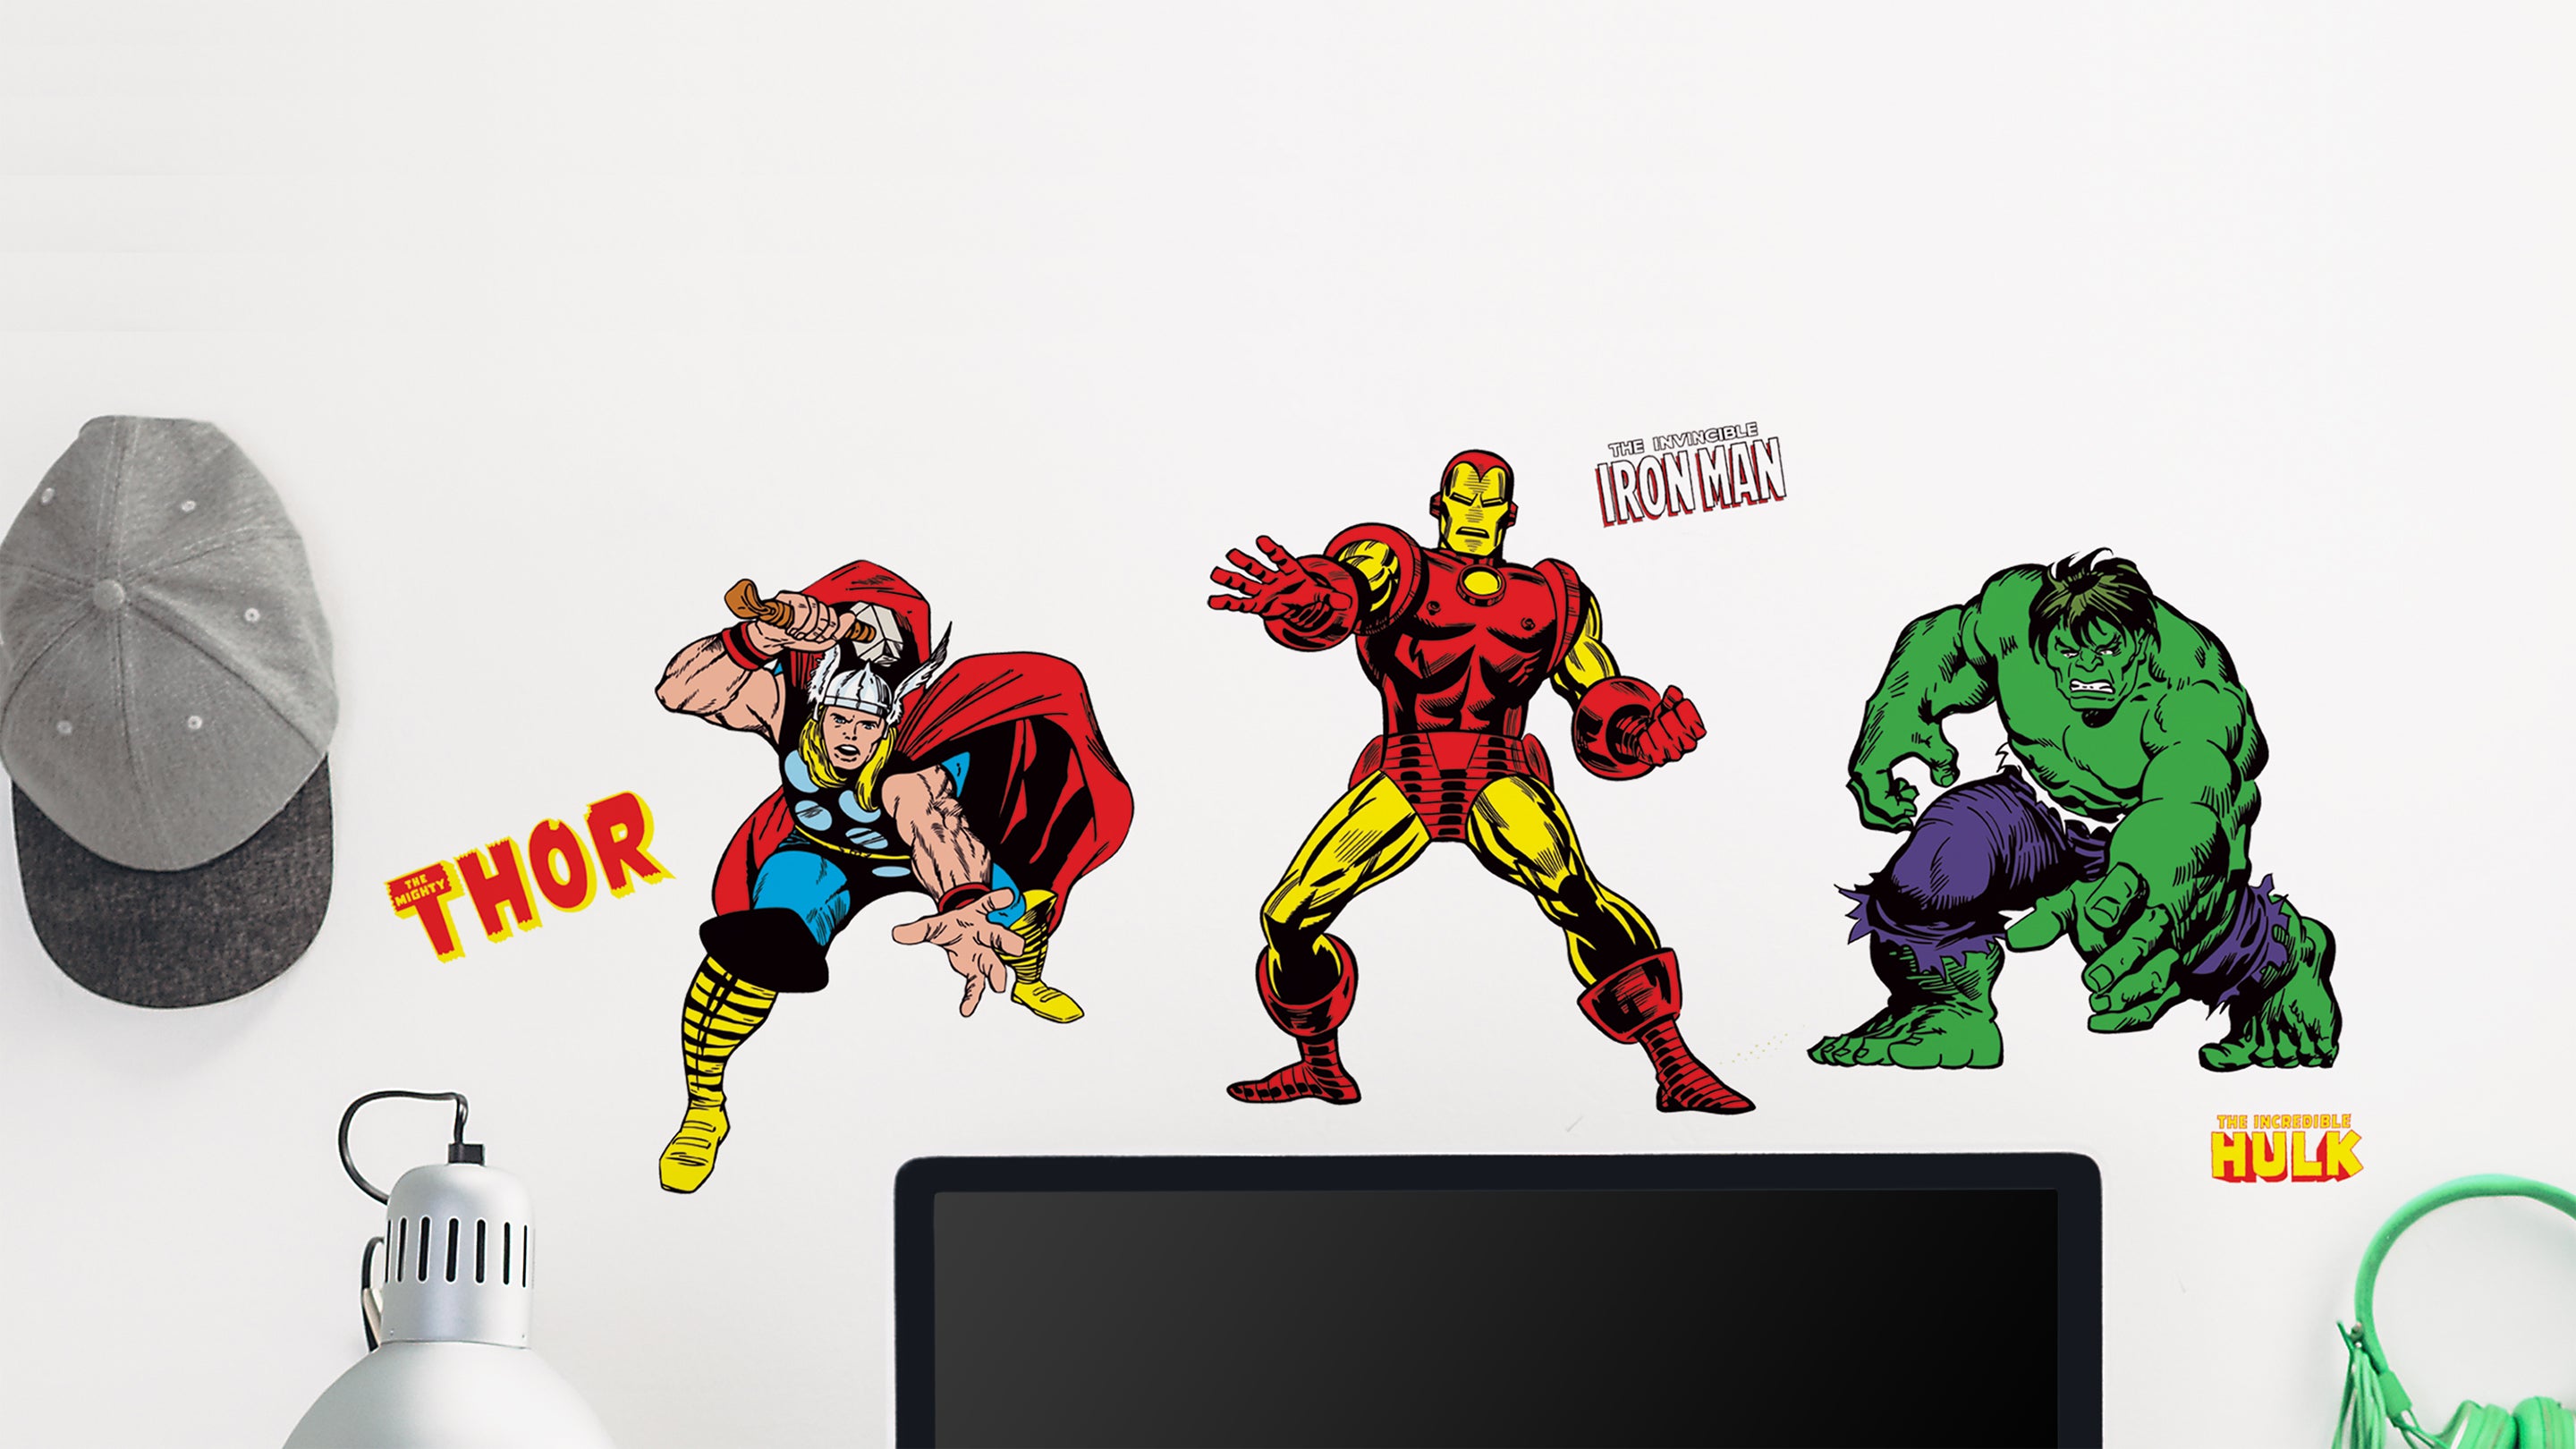 IRON MAN 47" GiAnT Wall Decals CLASSIC MARVEL Room Decor Stickers Comics Avenger 